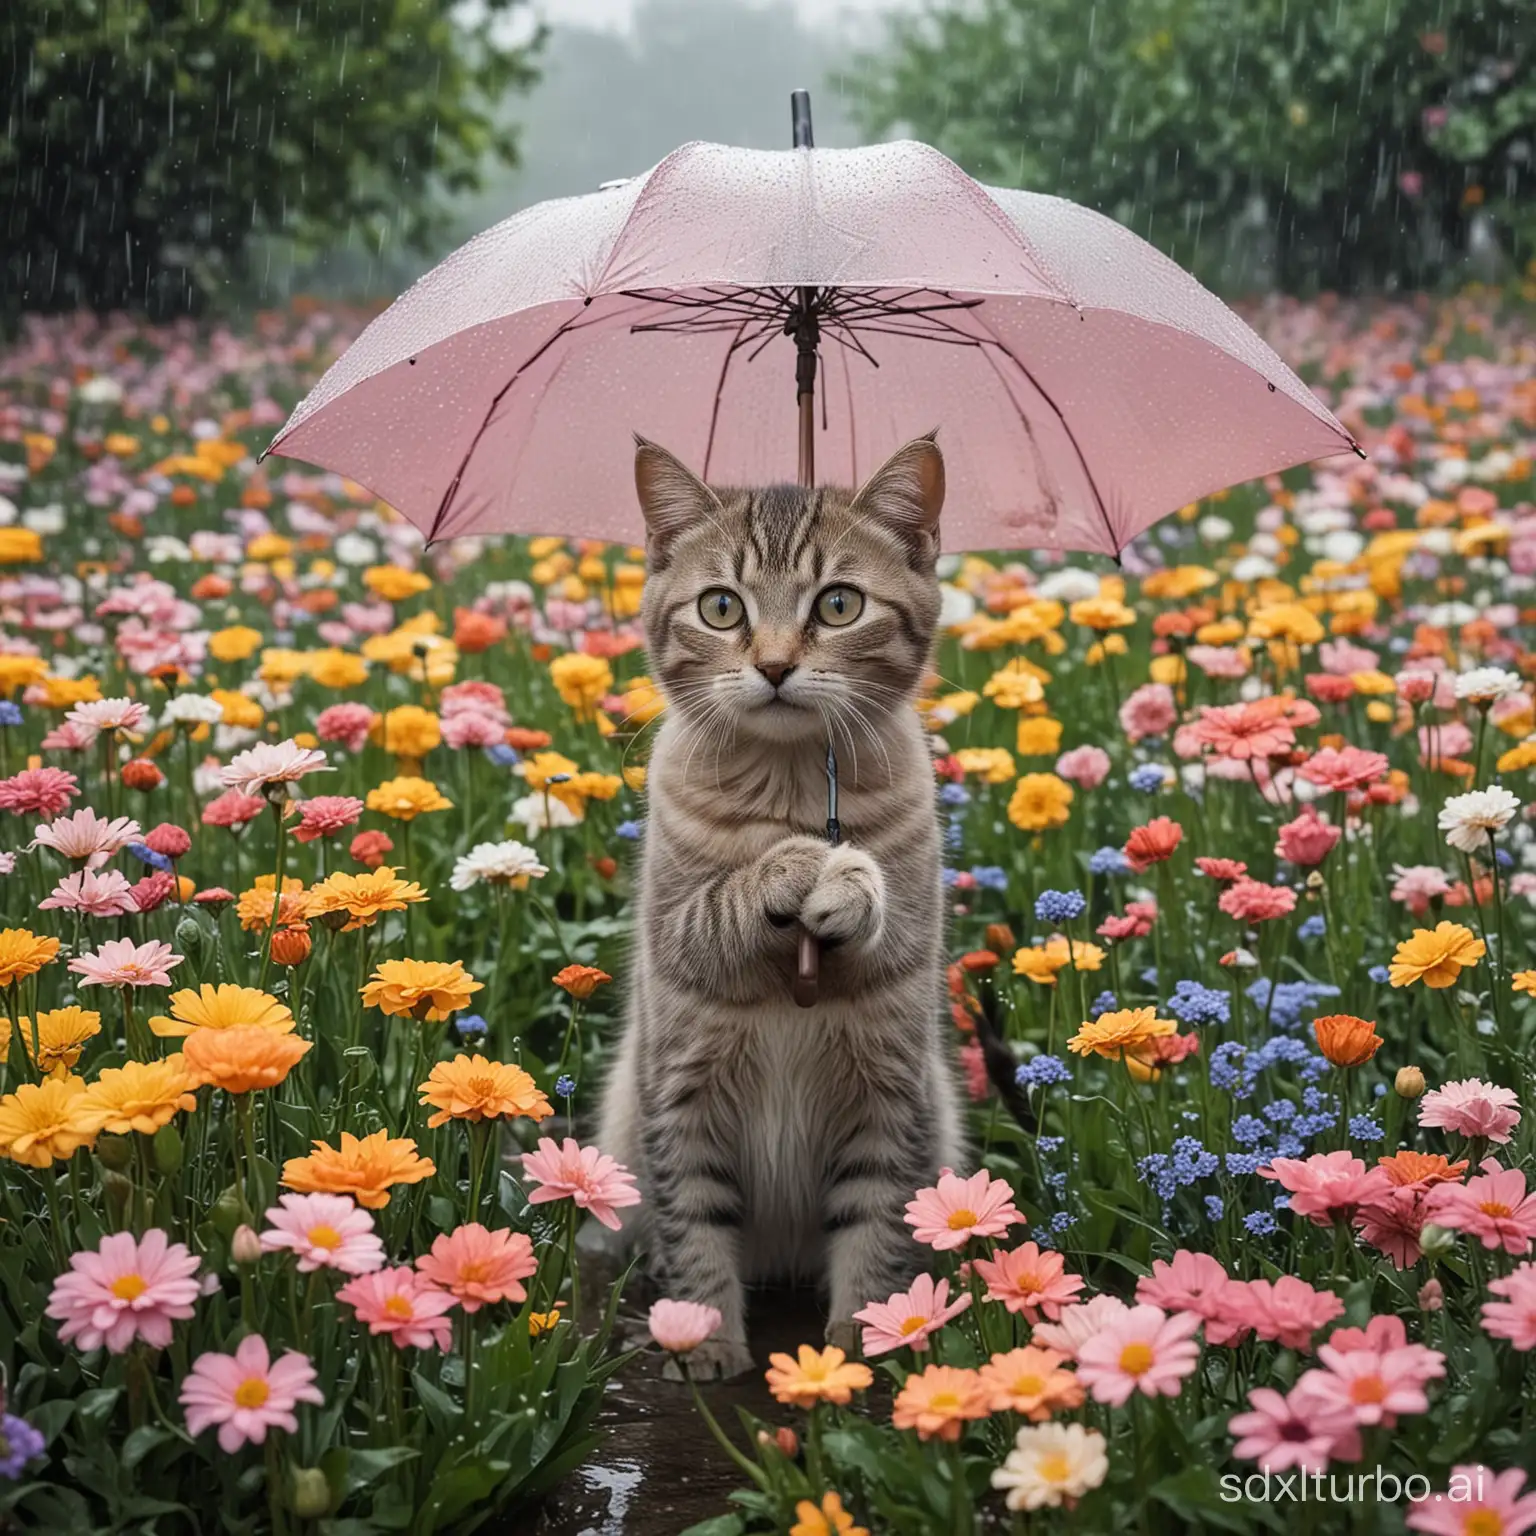 The little cat, holding an umbrella, stood in a sea of flowers on a rainy day.